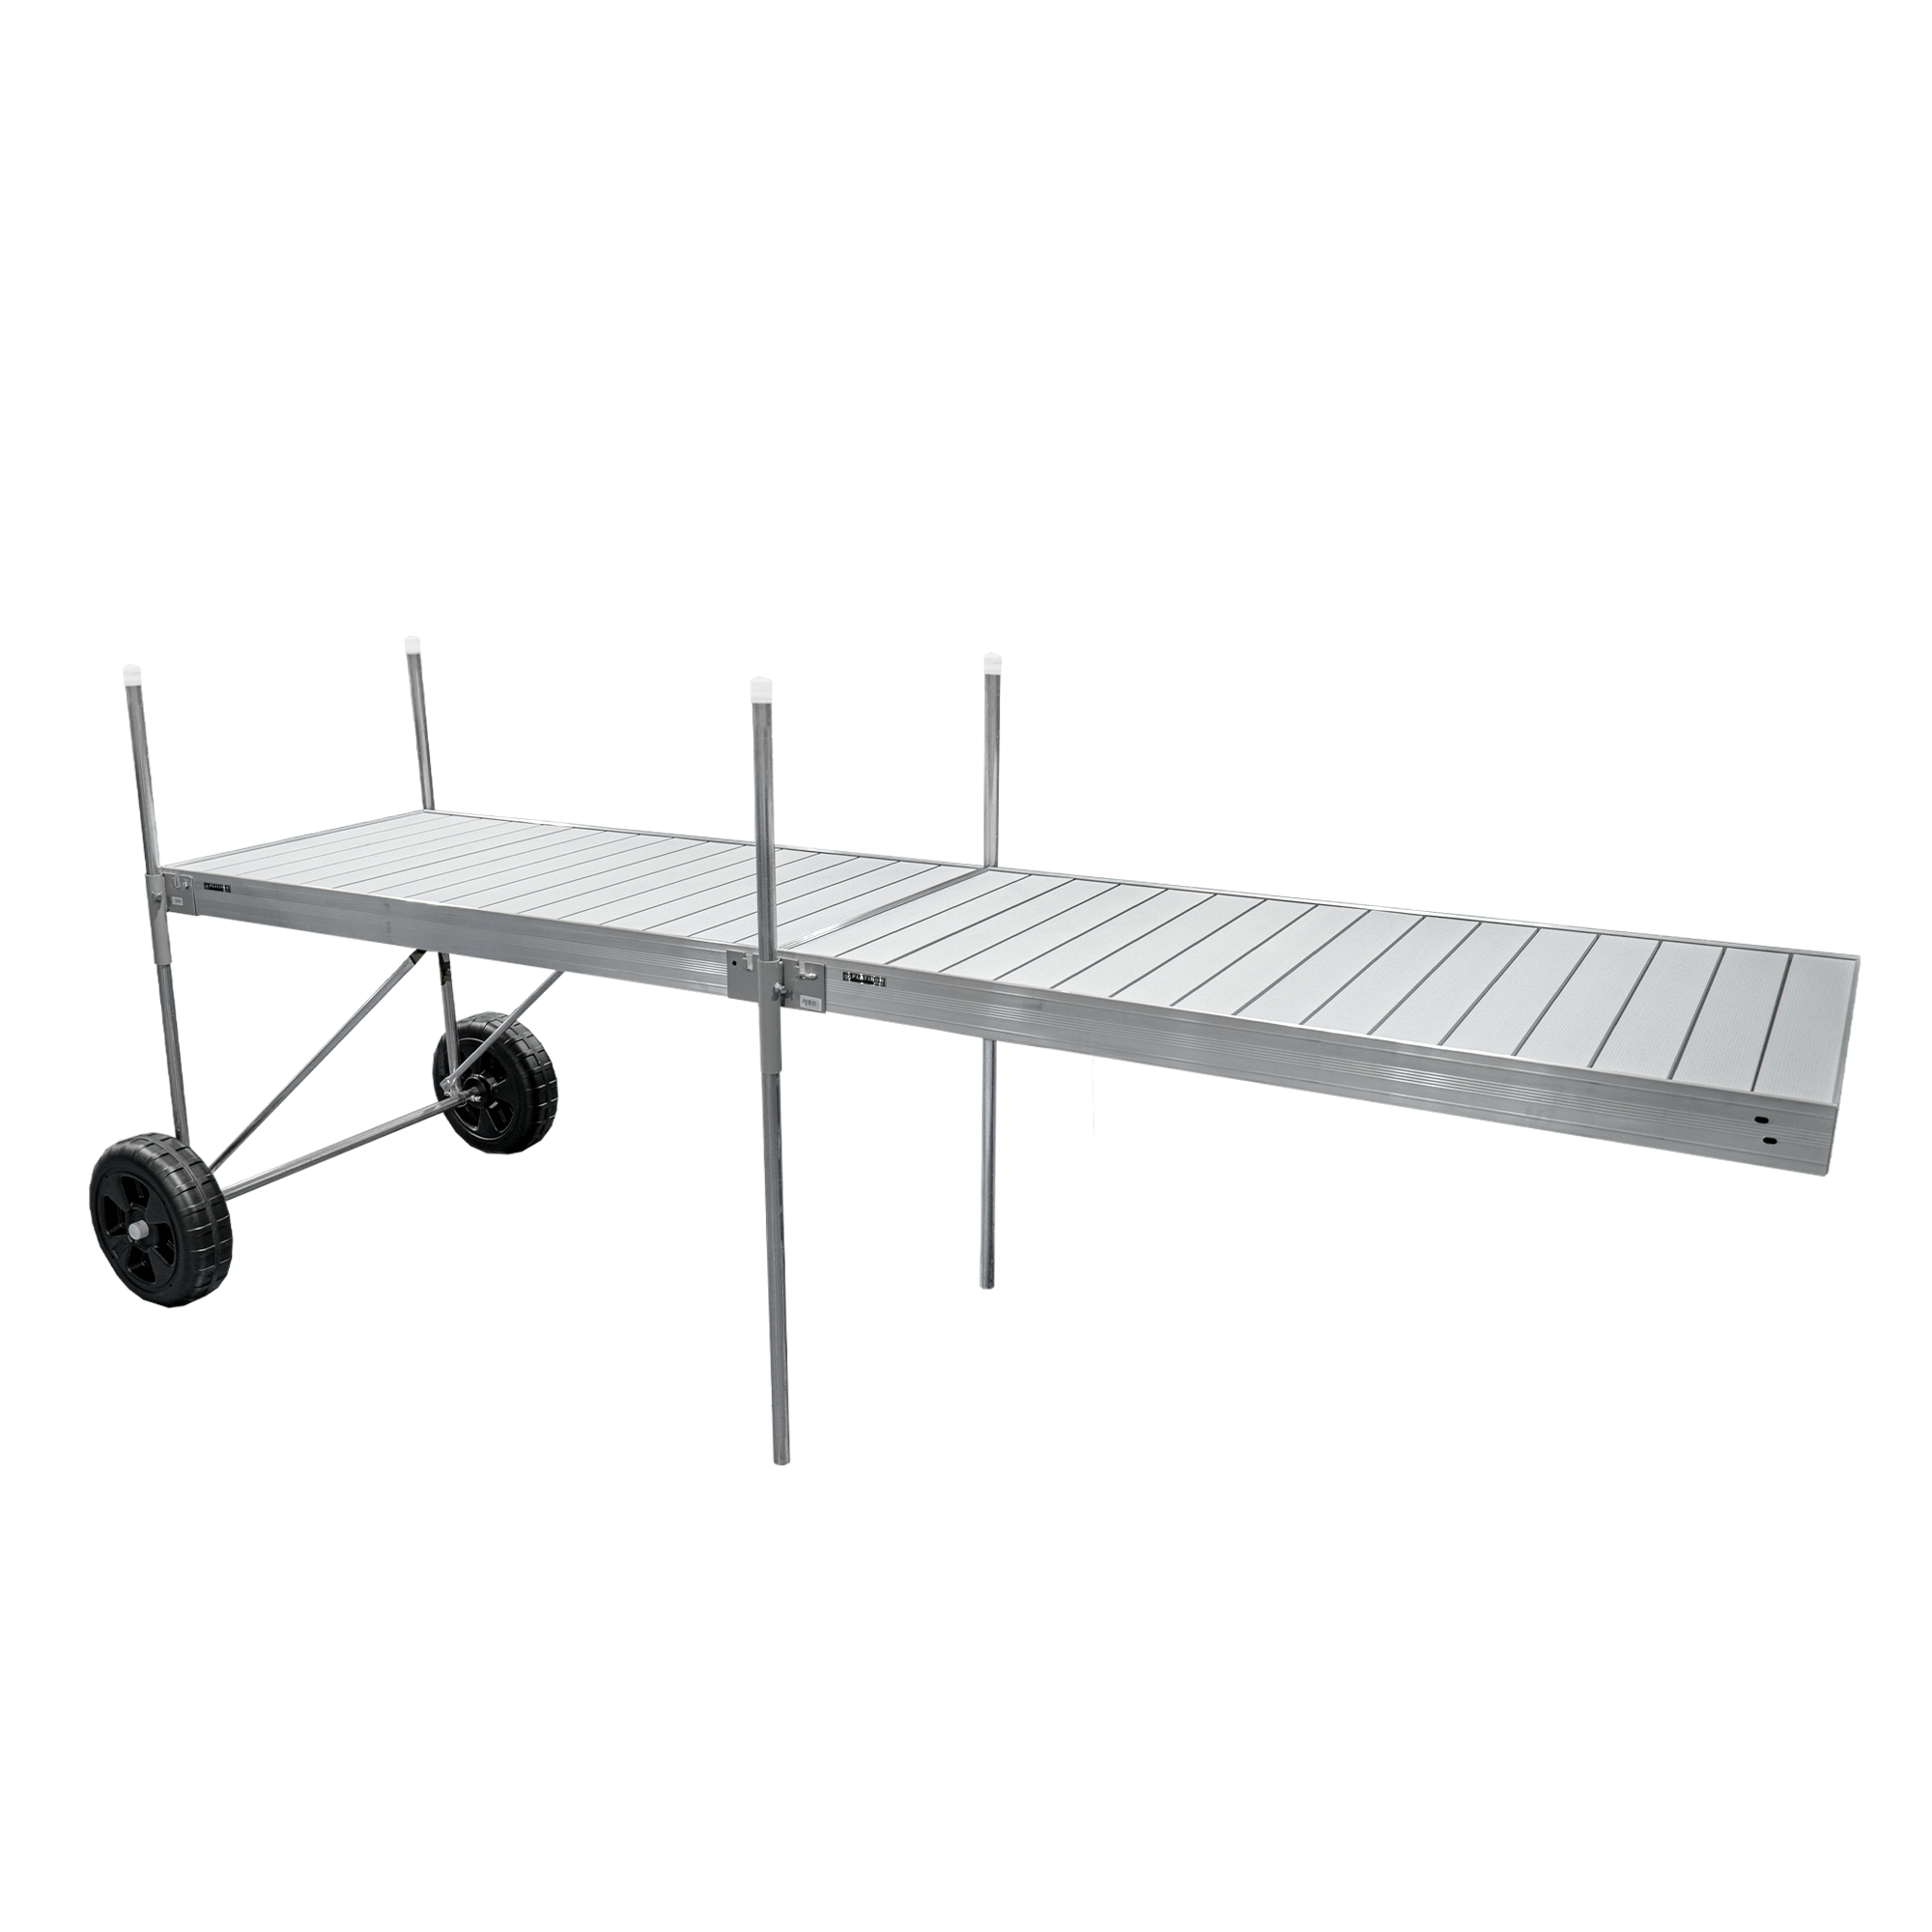 16 ft. Roll-In-Dock Straight System with Aluminum Frame and Aluminum Decking